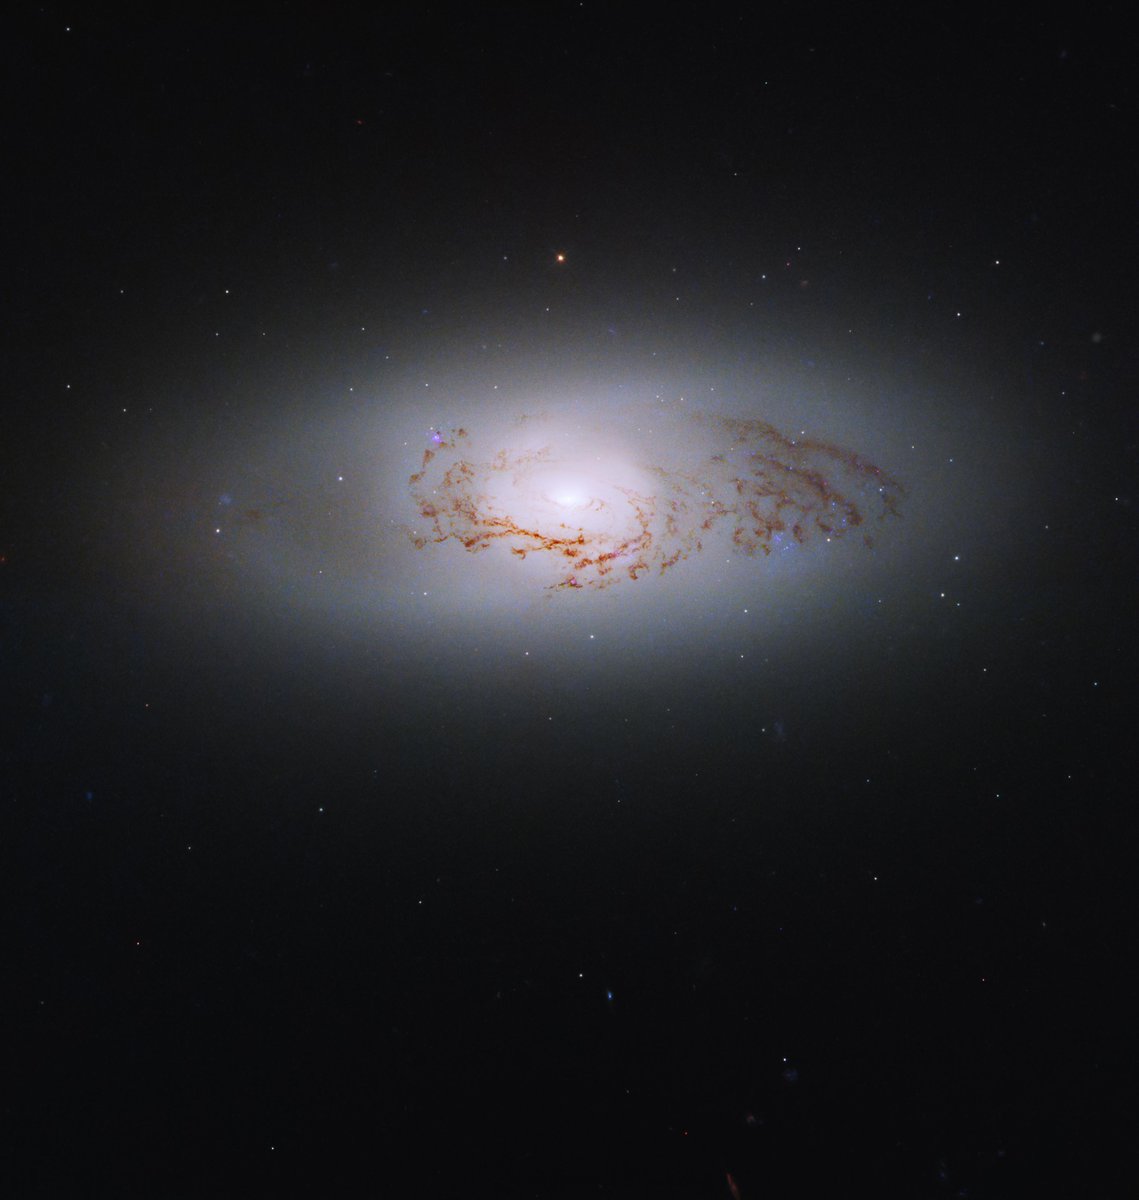 Welcome to #BlackHoleWeek!

To celebrate, Hubble has new images to share featuring active galactic nuclei, or AGNs. Some galaxies contain AGNs, which are extremely bright central regions that host a supermassive black hole! 

First up, feast your eyes on NGC 3489 ⬇️